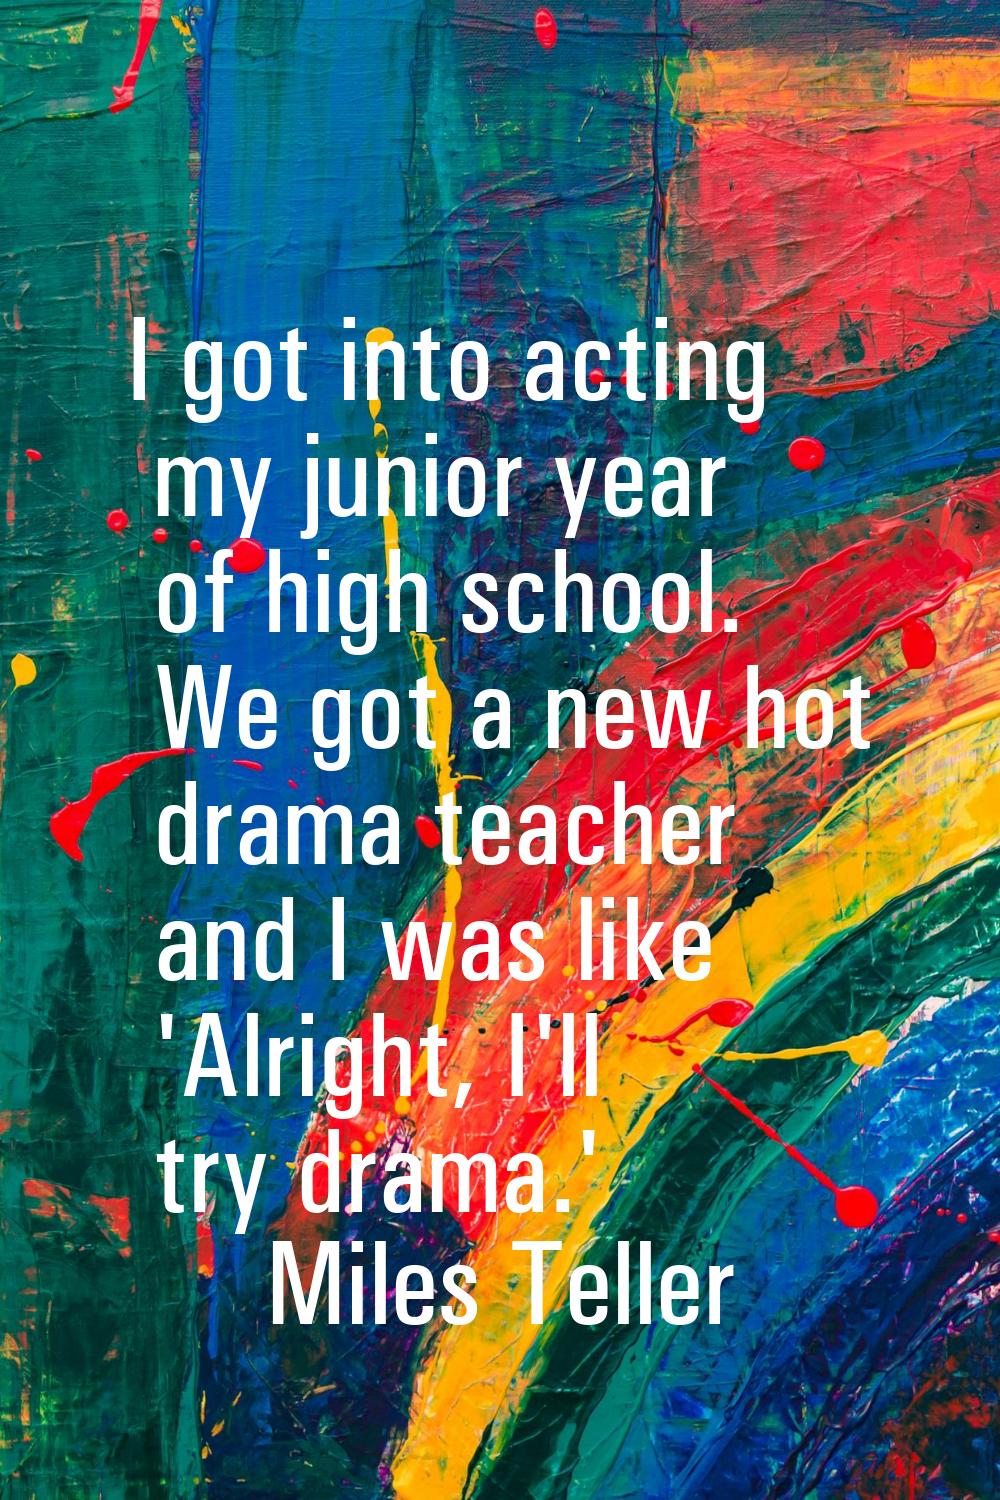 I got into acting my junior year of high school. We got a new hot drama teacher and I was like 'Alr